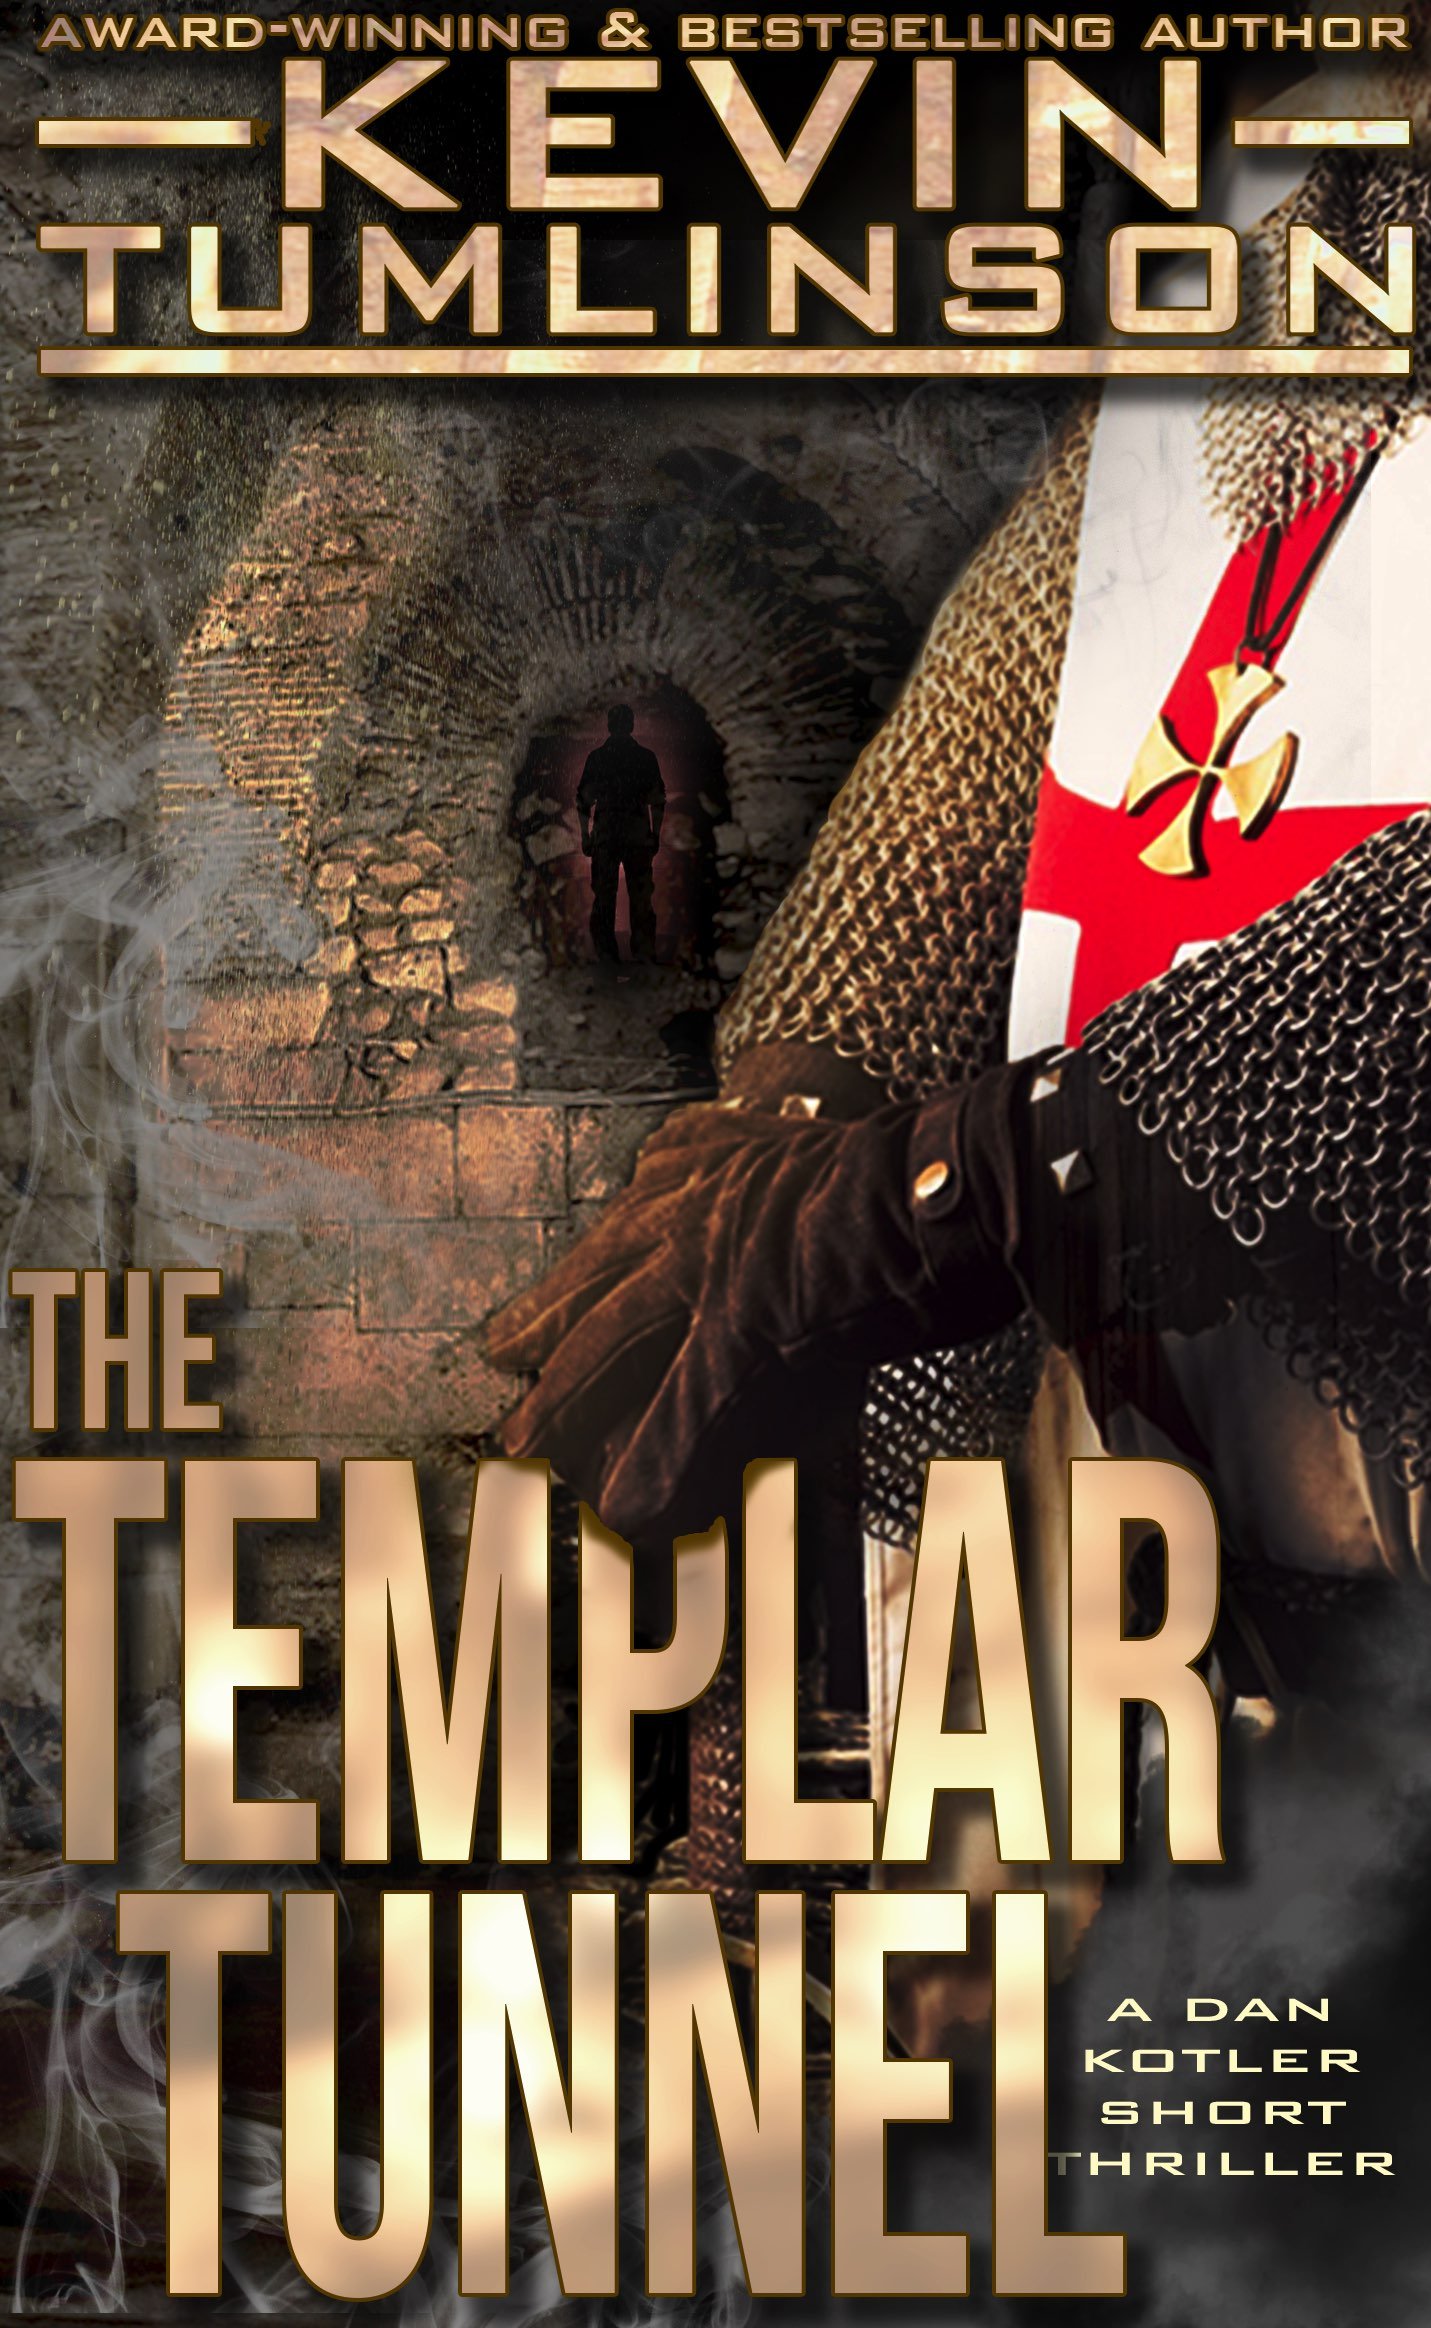   SOME TESTS ARE LIFE OR DEATH   DAN KOTLER—Archaeologist, occasional FBI Consultant, certified Trouble Magnet—just wanted a vacation. And an invitation to help uncover and explore a newly discovered Templar tunnel seemed like just the ticket.  When 